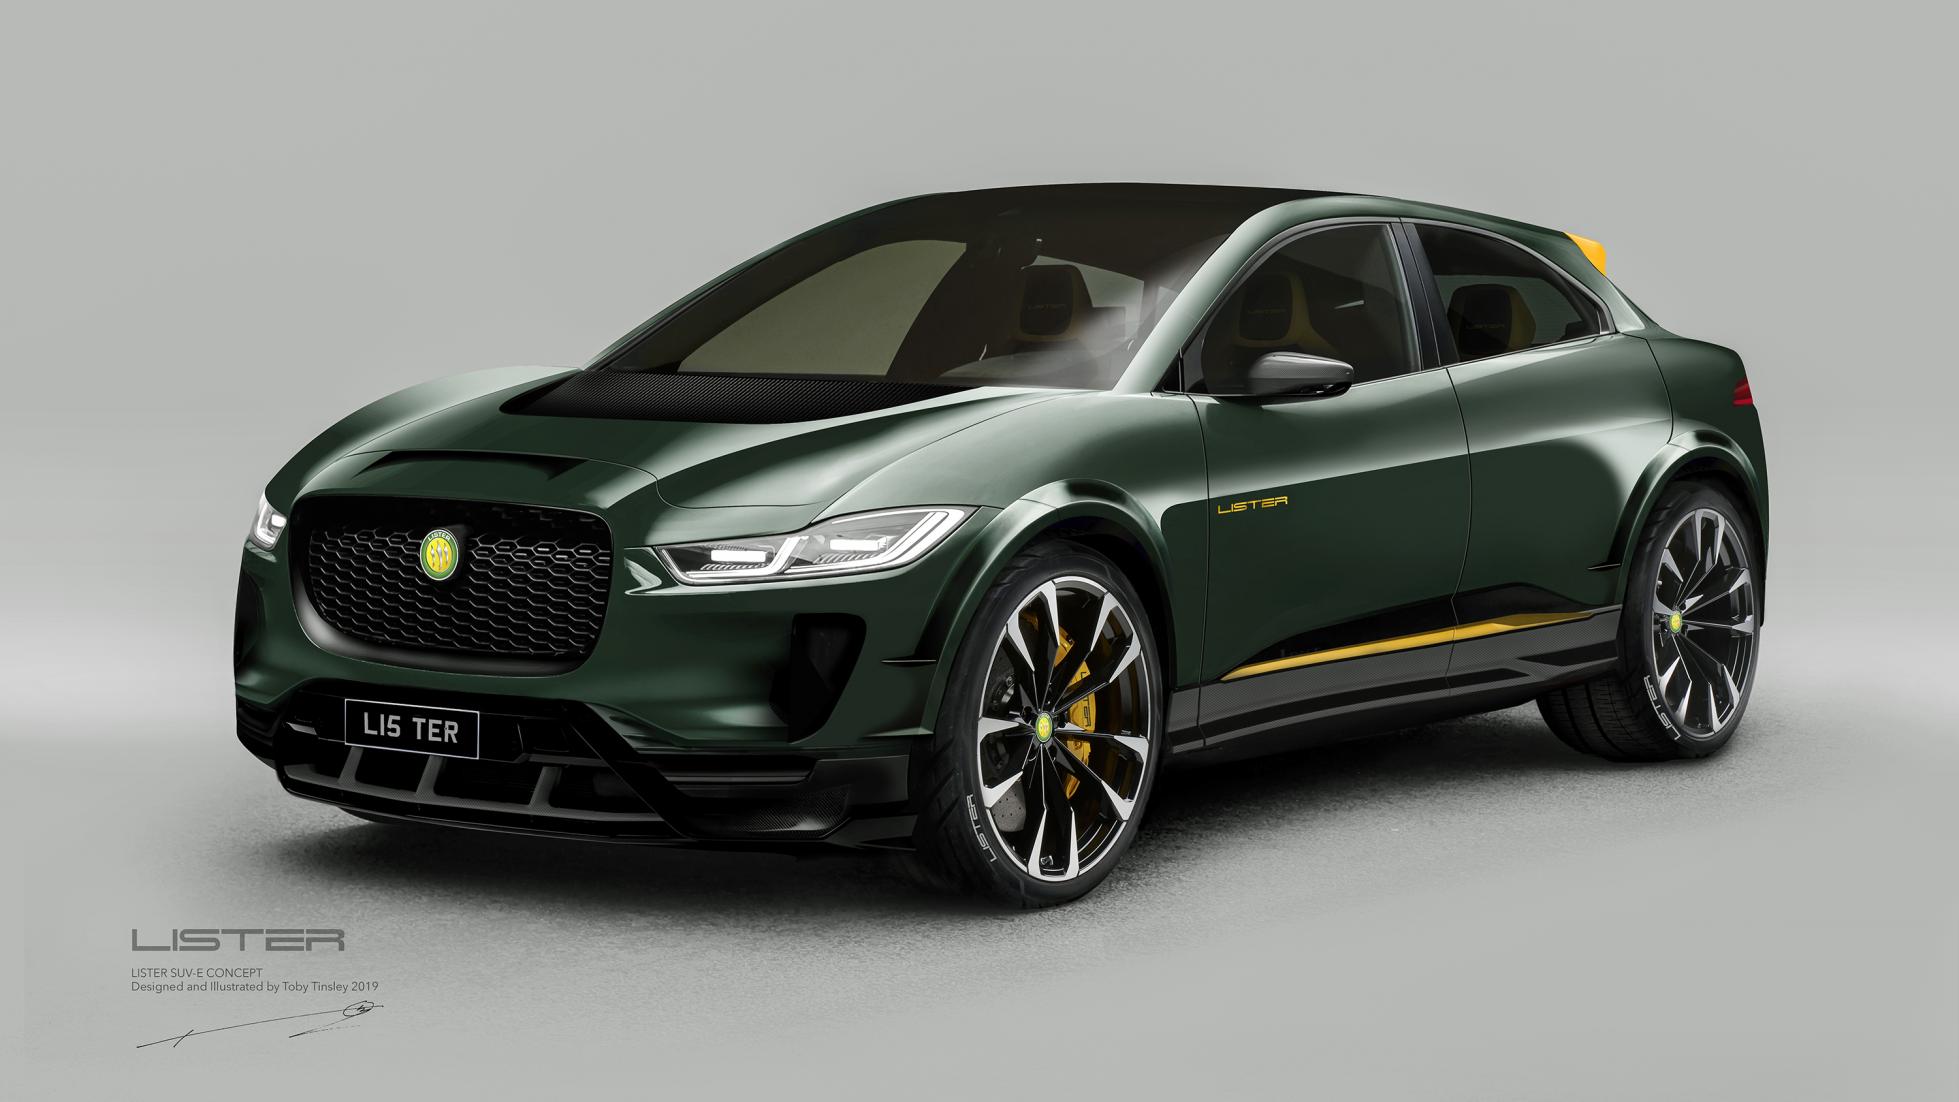 The Lister SUV-E is a lighter, faster Jaguar I-Pace